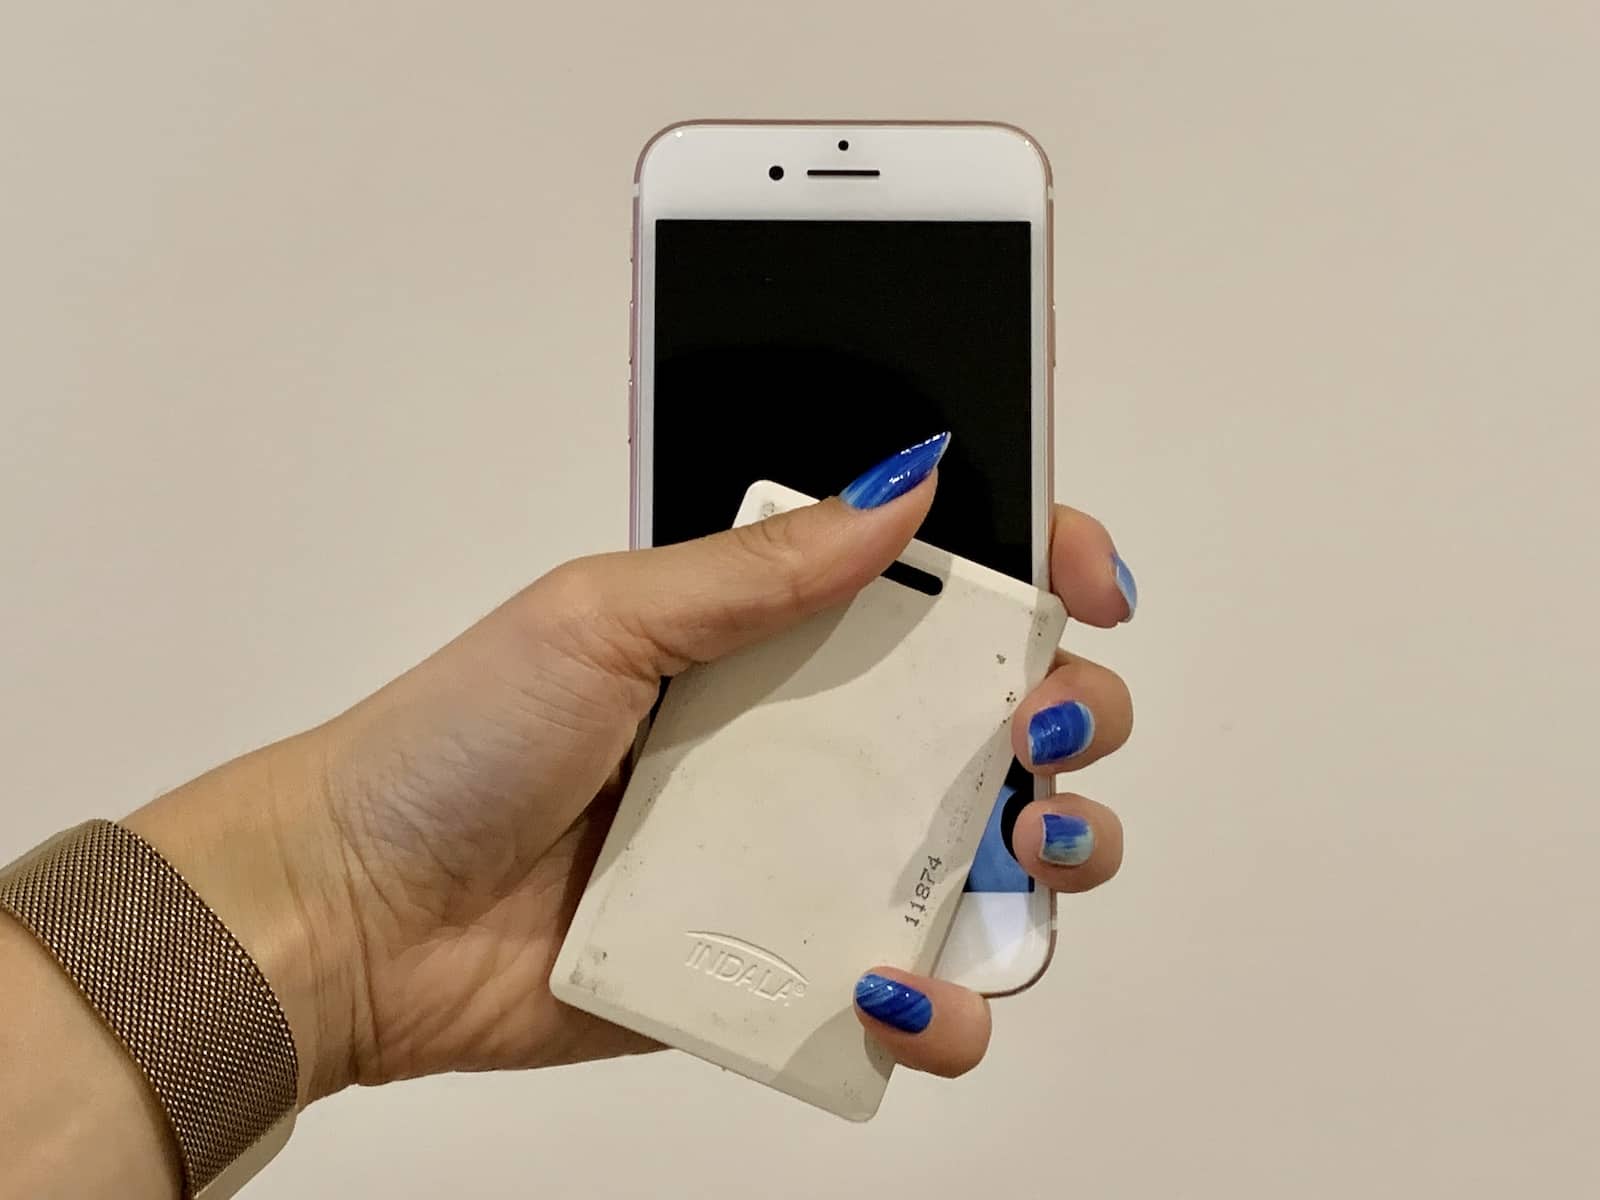 A woman’s hand holding a smartphone and white plastic card